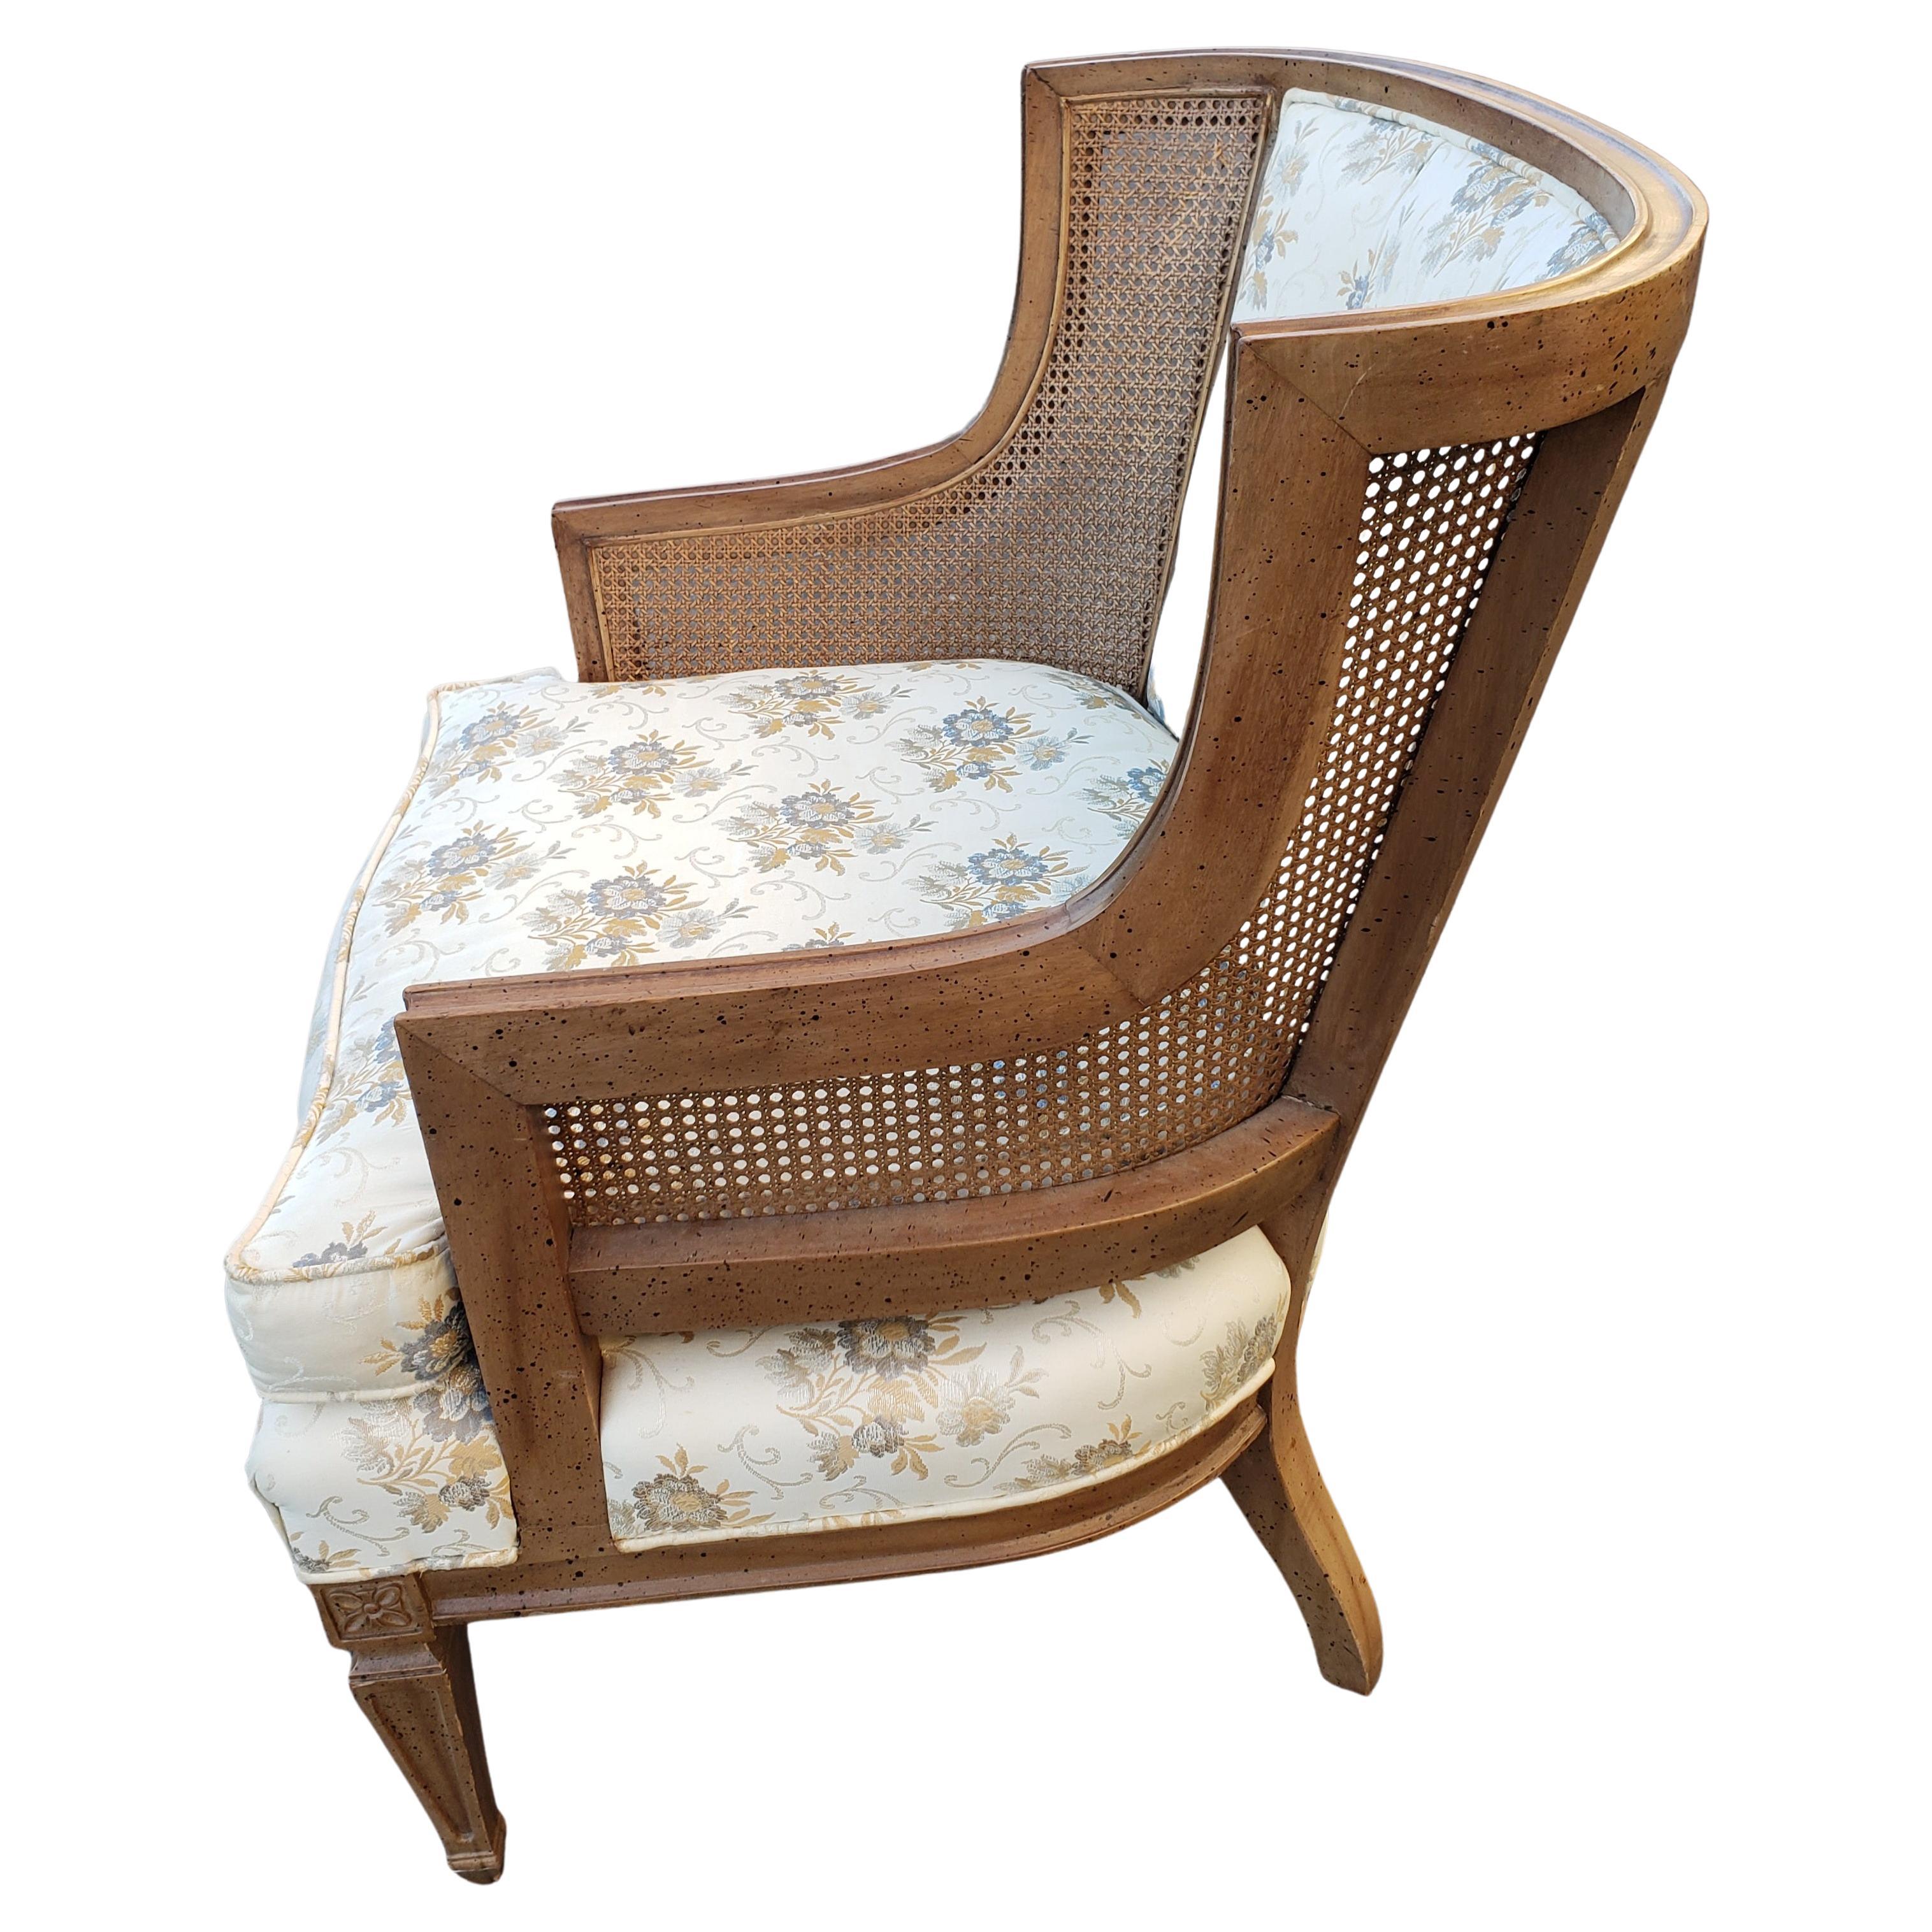 Mid-Century Modern Hibriten French Bergere Walnut Cane Upholstered Chairs, circa 1960, a Pair For Sale